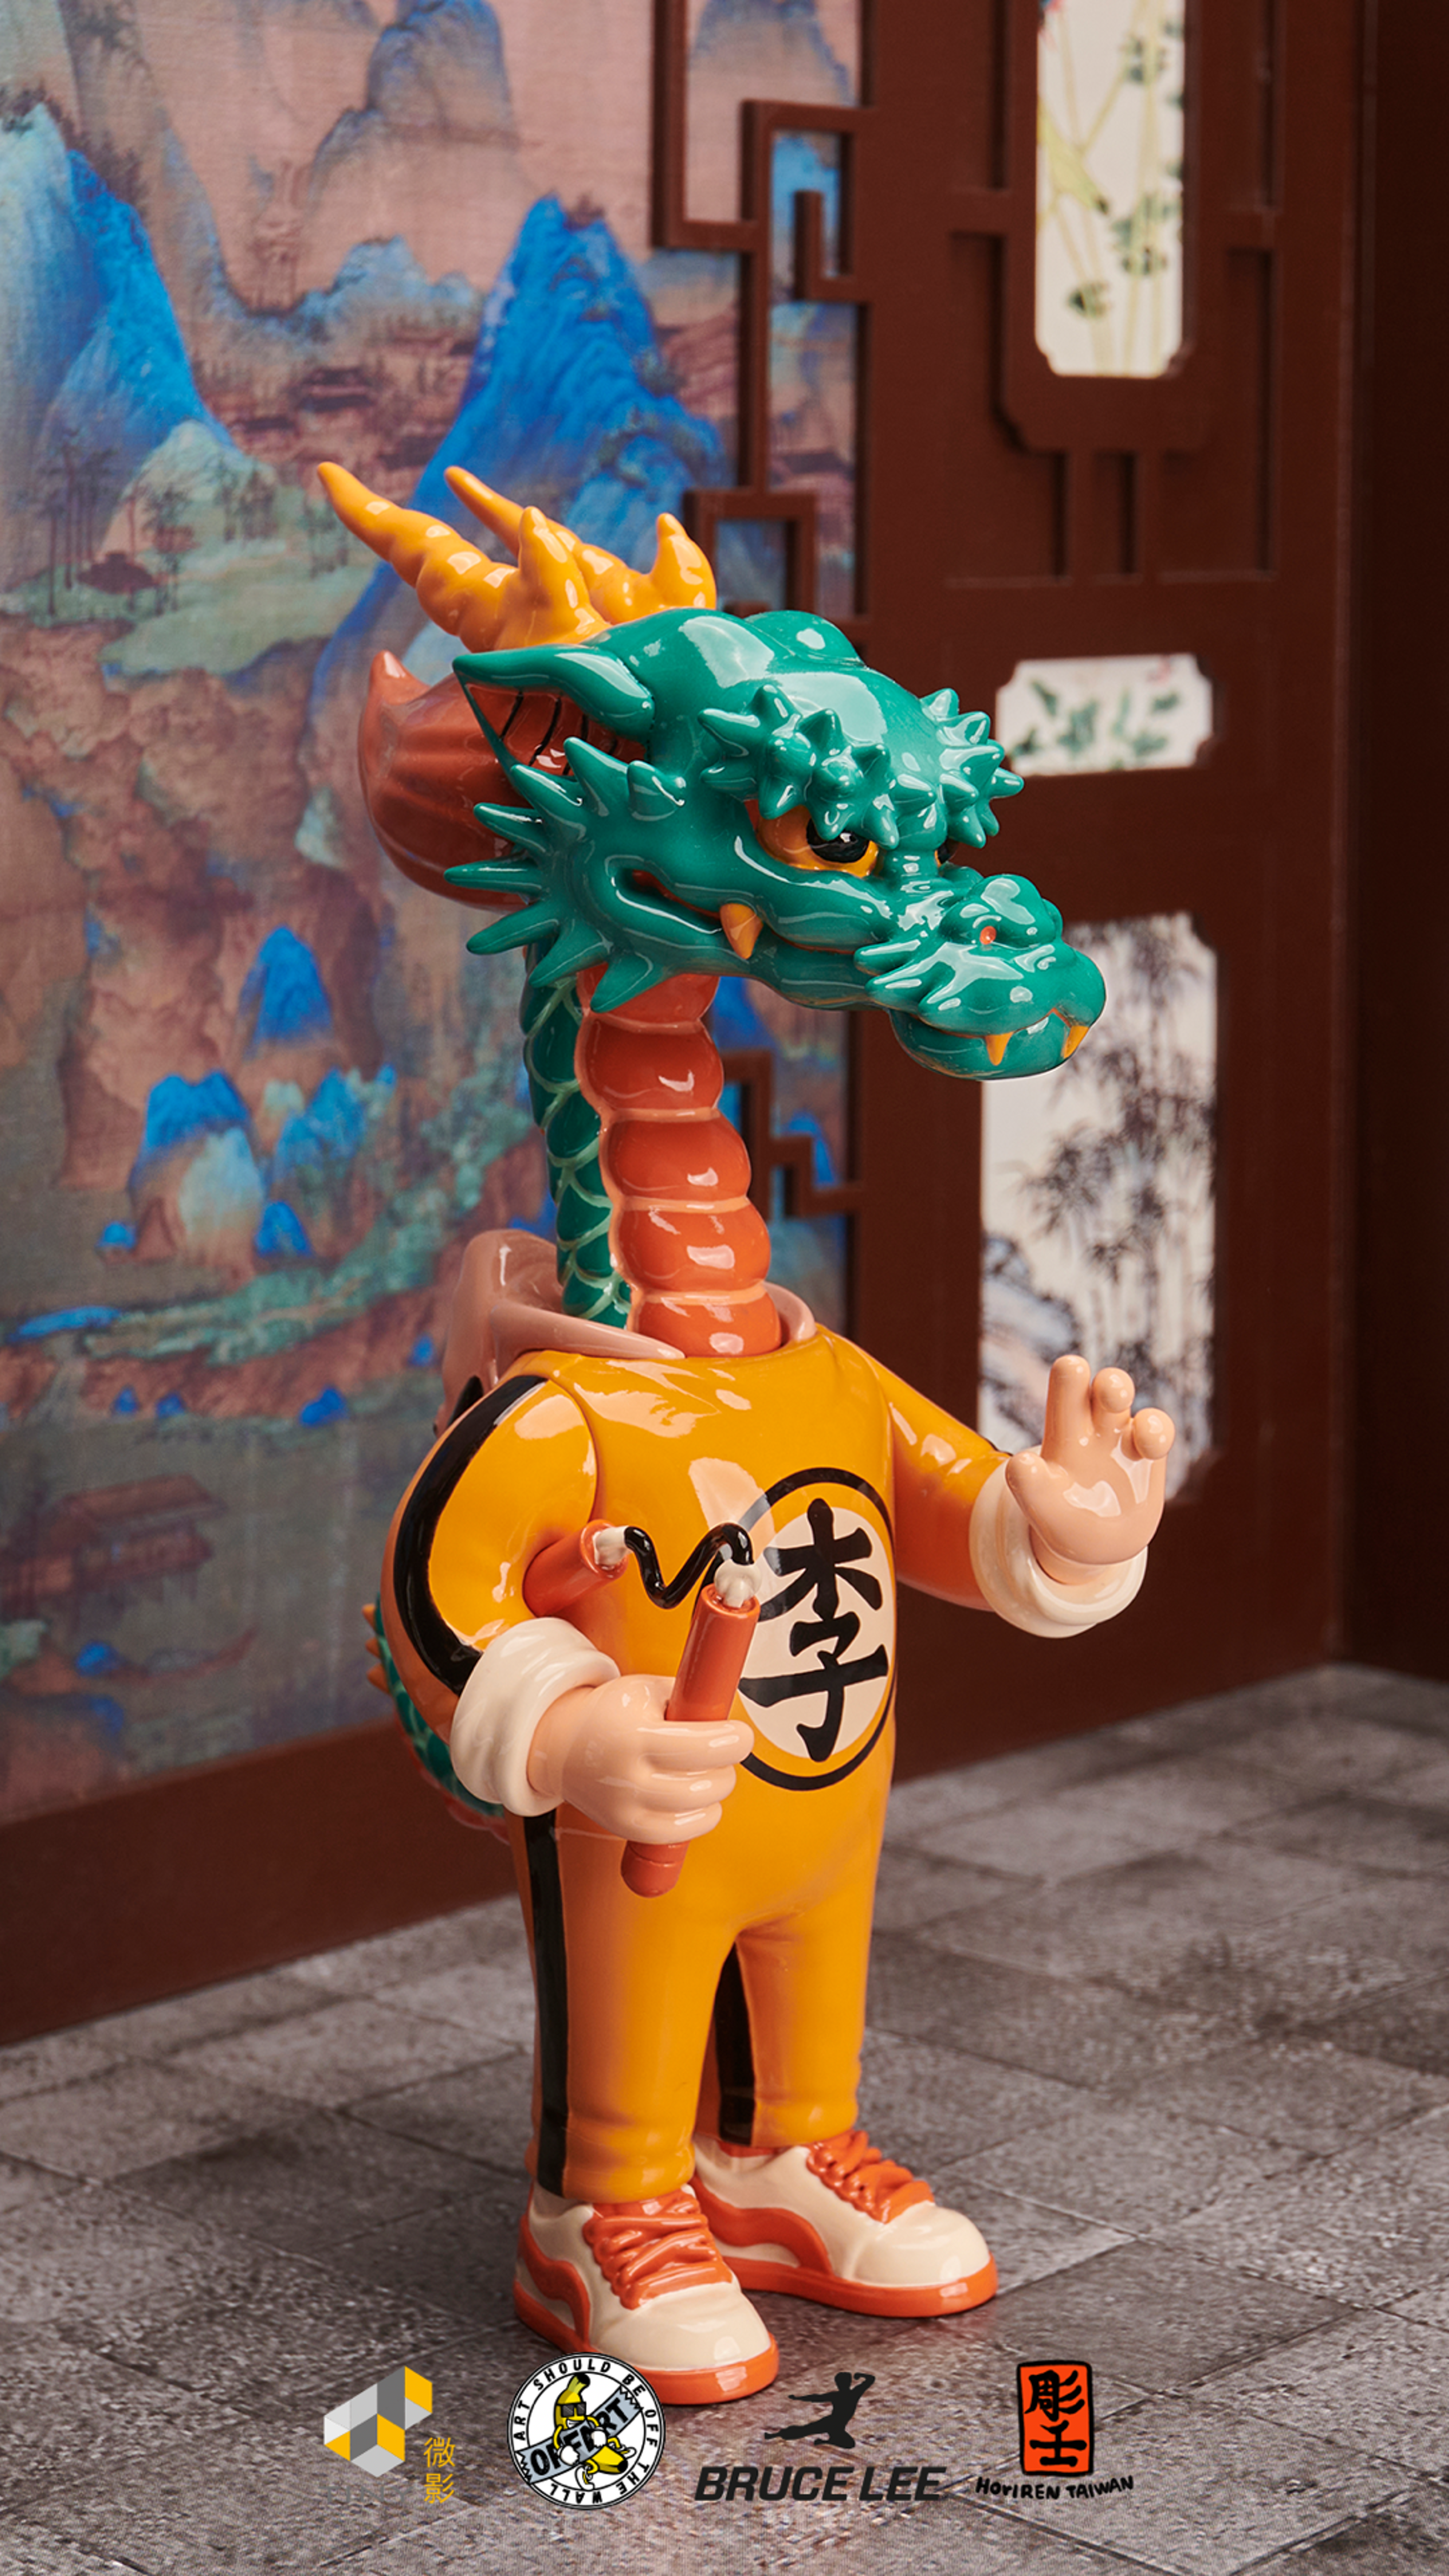 Preview image for the show titled "OFFART x TINY Like A Dragon x Bruce Lee" at Today @ 8:35 PM